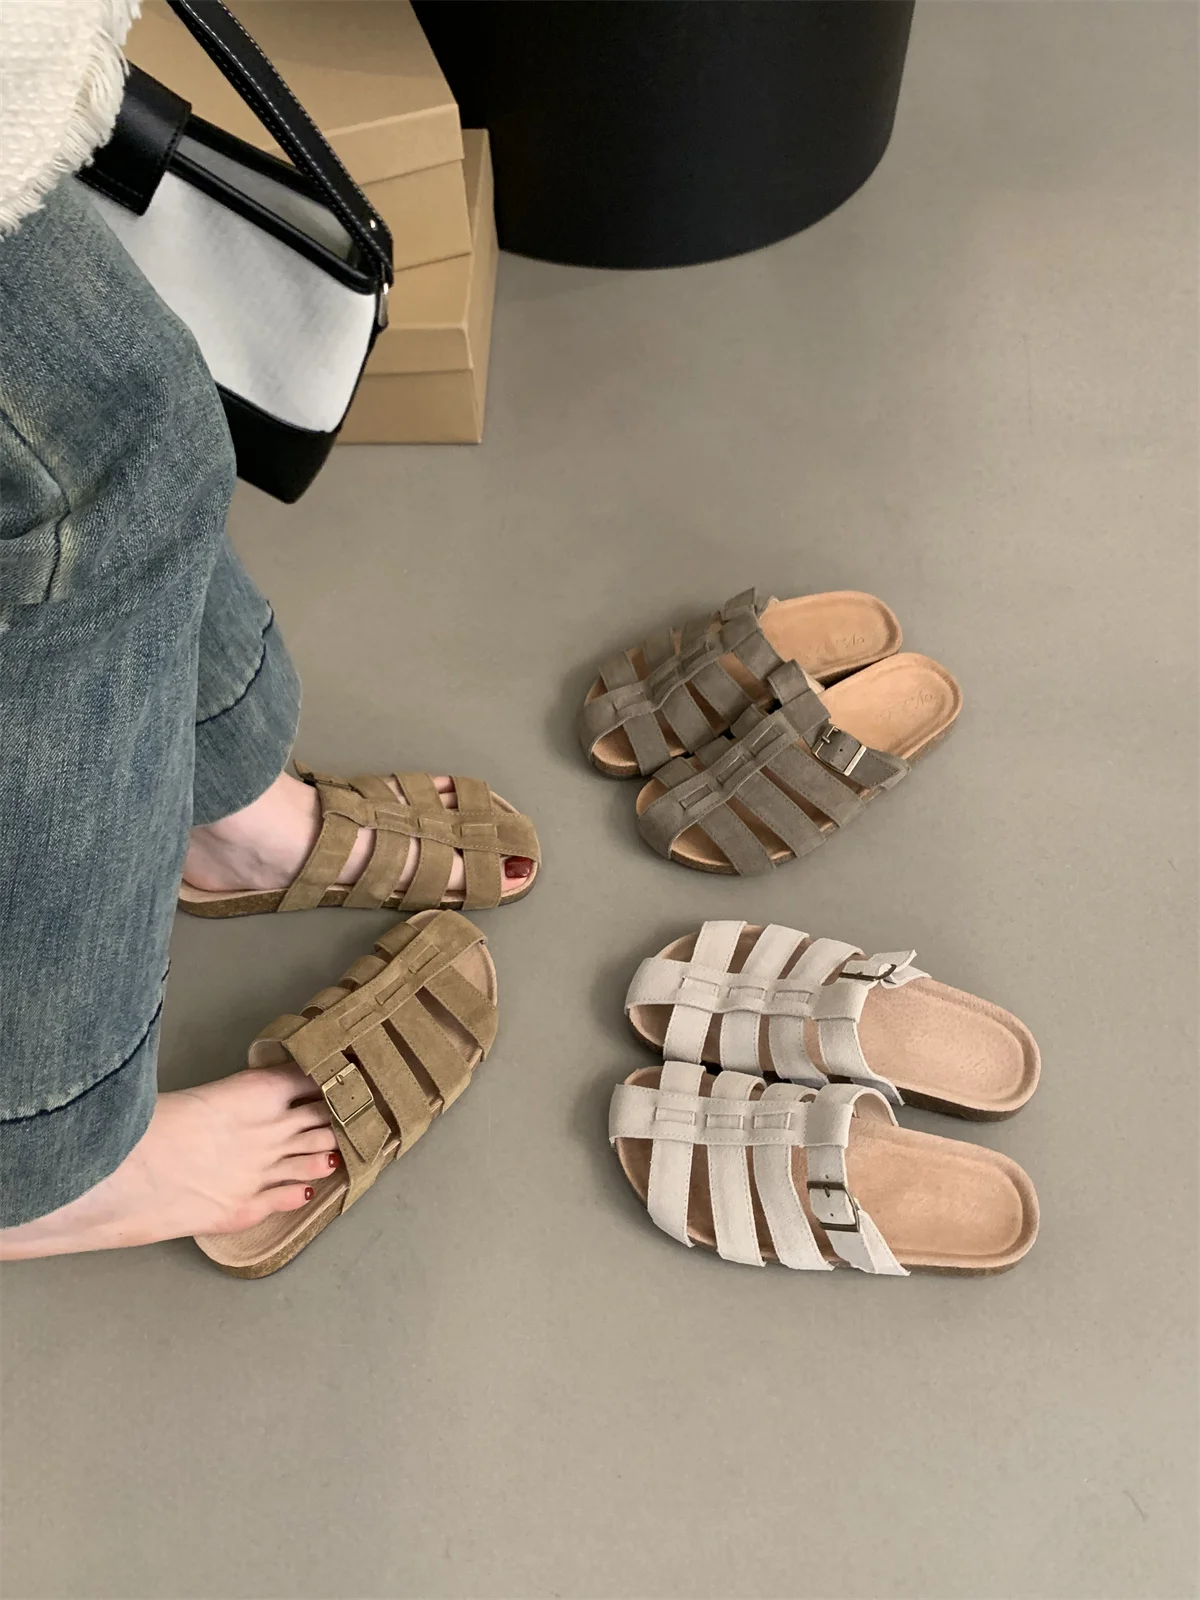 

Hollow Flat Sandals Versatile Simple Roman Shoes Female Chic Summer Round Toe Slip On Ballerinas Shoes Soft Mules Shoes Outdoor